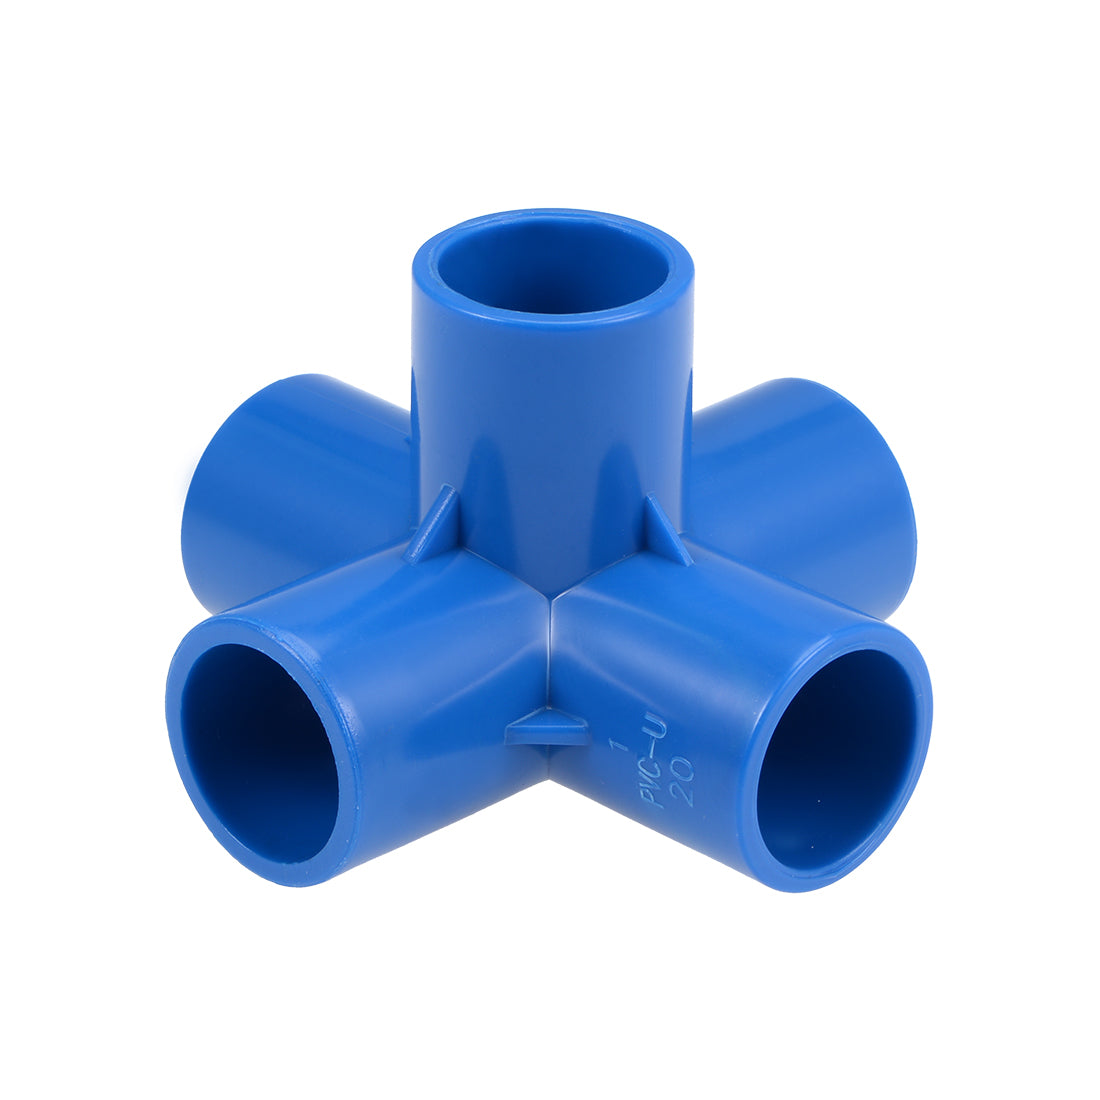 uxcell Uxcell 5 Way 20mm Tee Metric PVC Fitting Elbow - PVC Furniture Elbow Fittings Blue 5Pcs